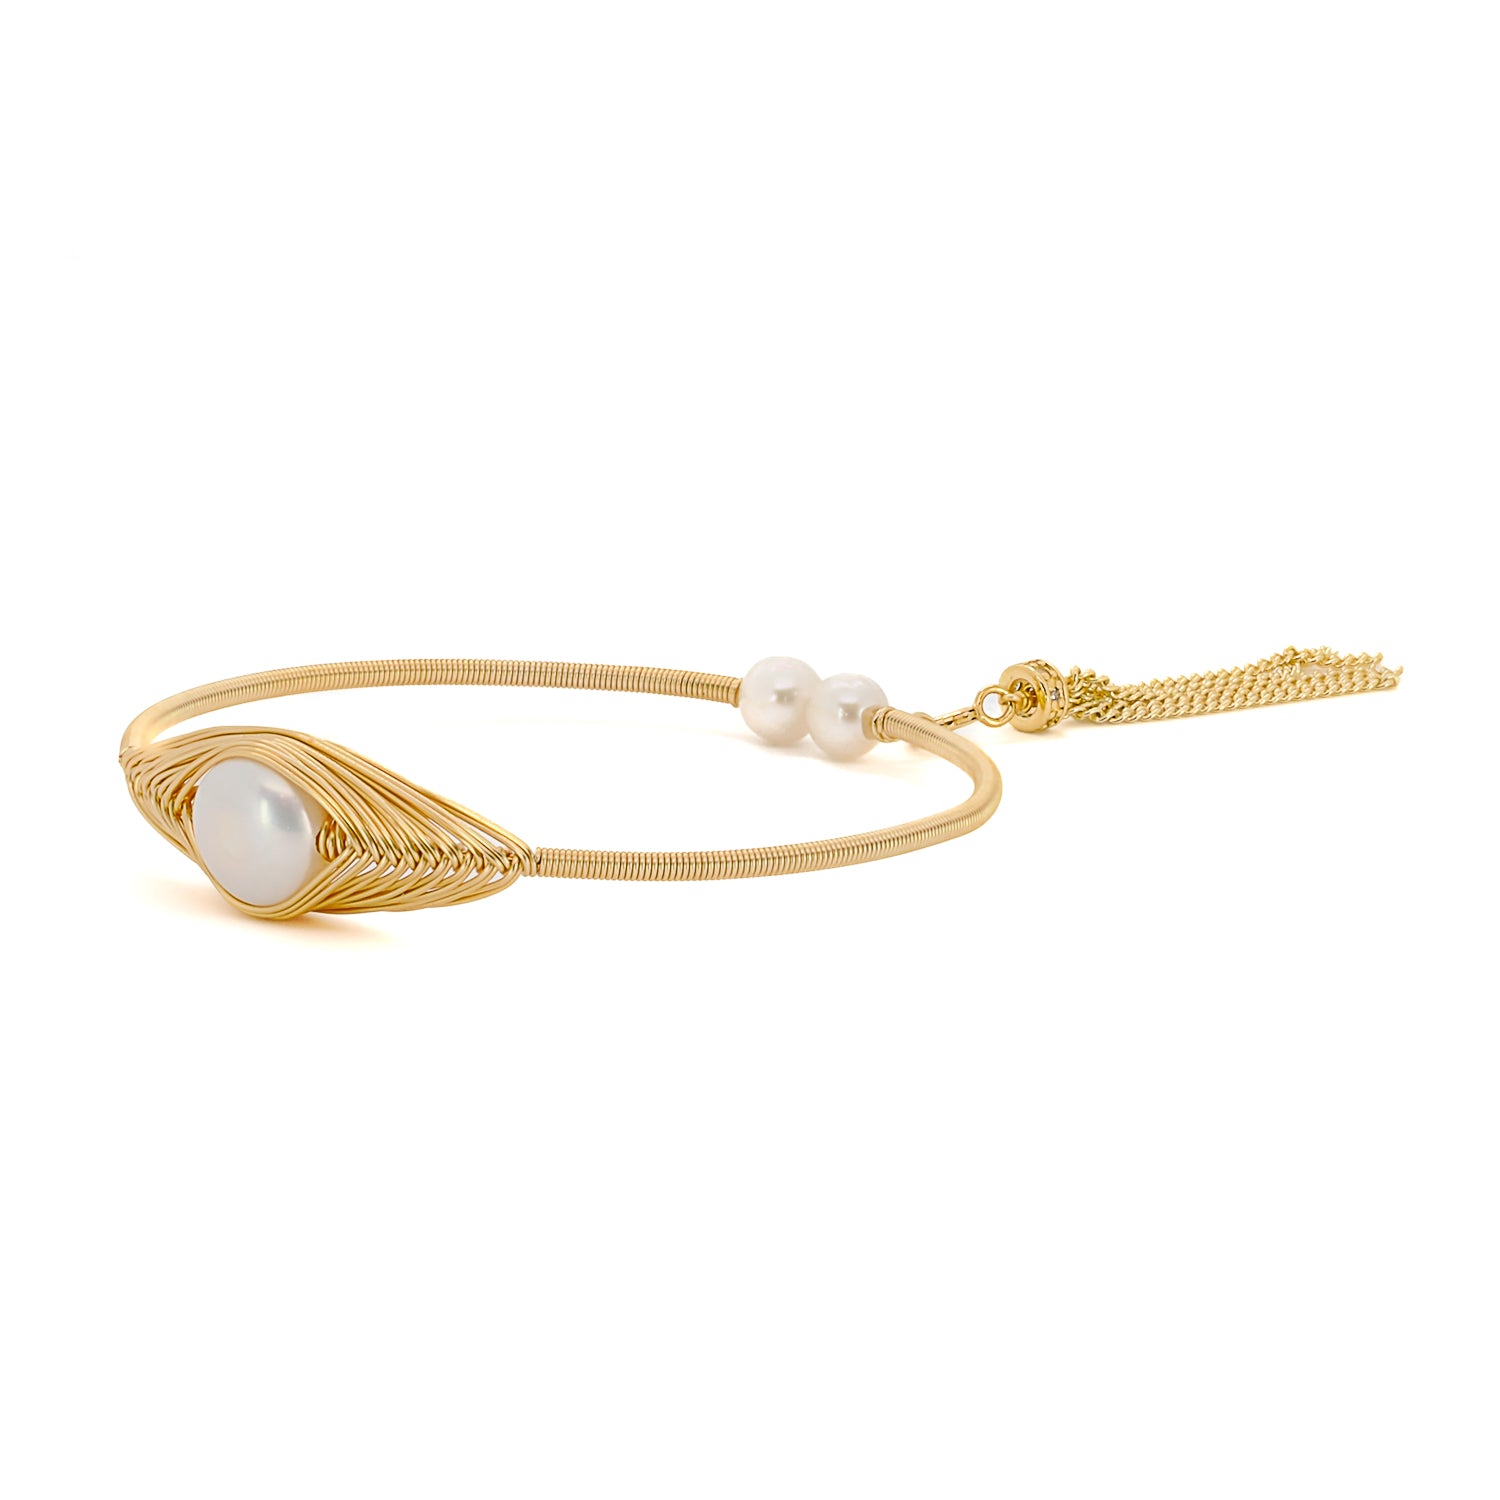 Opulent pearls and gold: Cleopatra-inspired bangle adds sophistication.